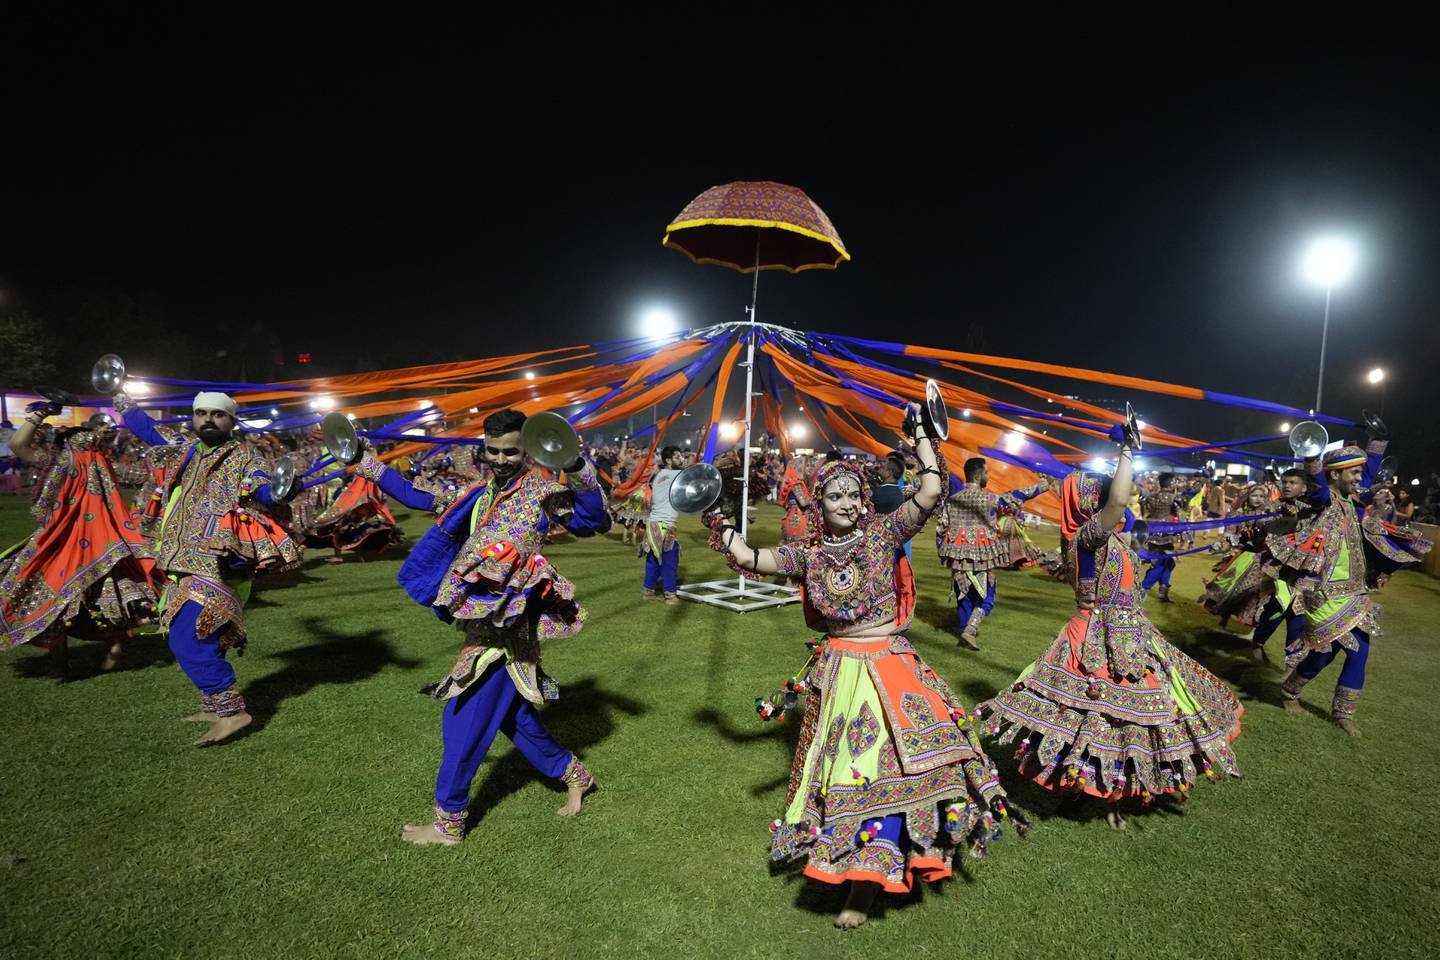 Indians in traditional dress perform the garba, the traditional dance of Gujarat state, during Navratri festival celebrations in Ahmedabad, India, September 27, 2022.  AP